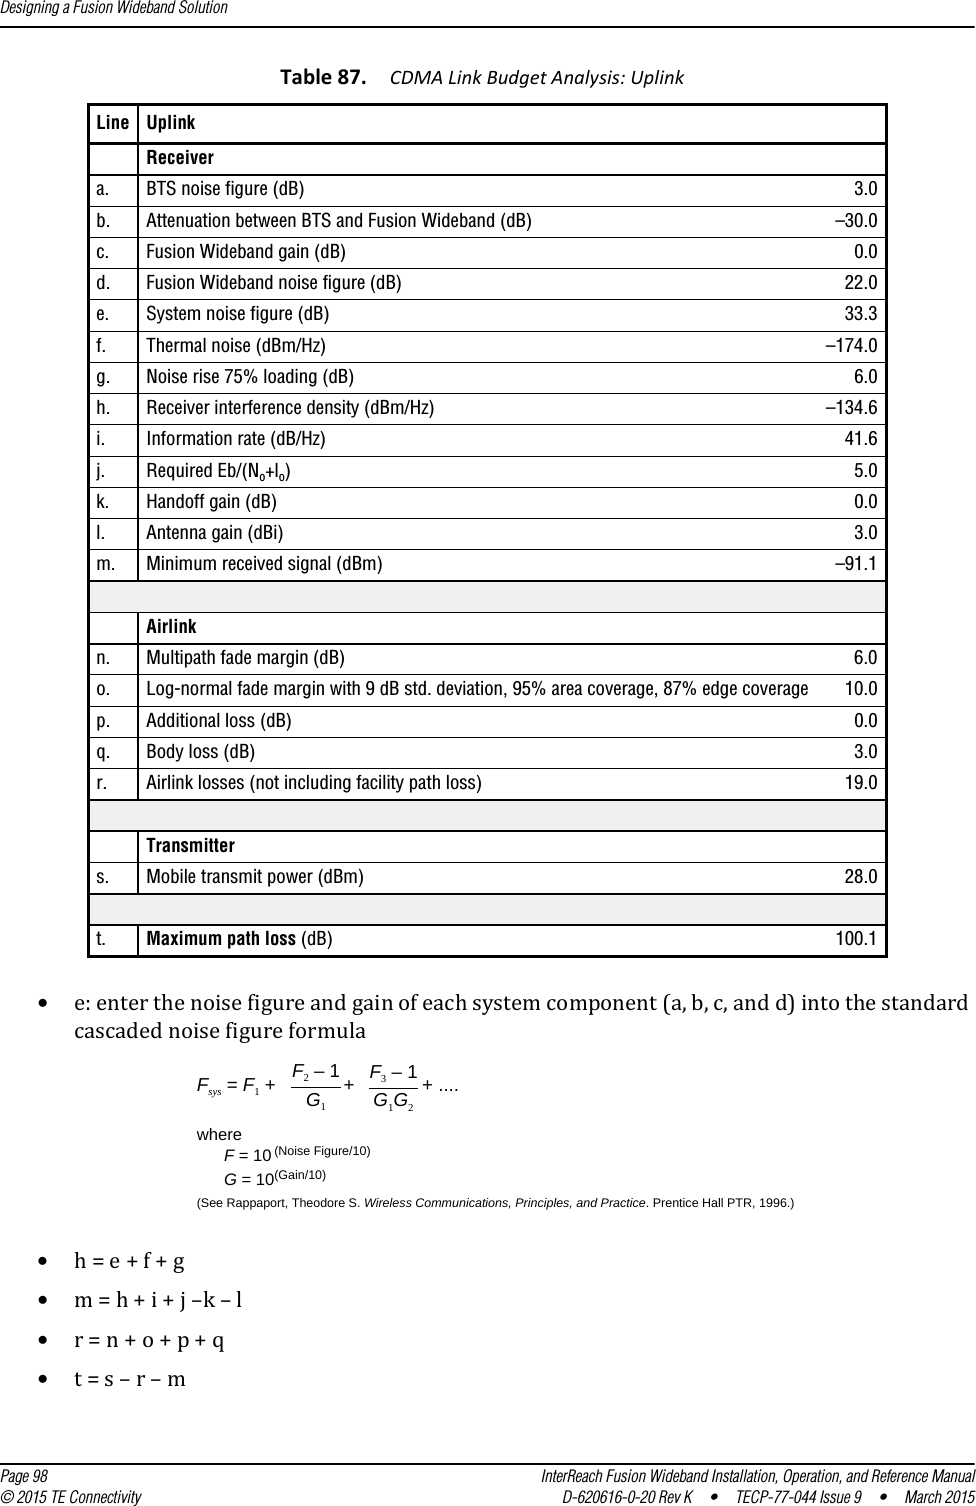 Designing a Fusion Wideband Solution  Page 98 InterReach Fusion Wideband Installation, Operation, and Reference Manual© 2015 TE Connectivity D-620616-0-20 Rev K  •  TECP-77-044 Issue 9  •  March 2015•e: enter the noise figure and gain of each system component (a, b, c, and d) into the standard cascaded noise figure formula•h = e + f + g•m = h + i + j –k – l•r = n + o + p + q•t = s – r – mTable 87. CDMA Link Budget Analysis: Uplink  Line UplinkReceiver a. BTS noise figure (dB) 3.0b. Attenuation between BTS and Fusion Wideband (dB) –30.0c. Fusion Wideband gain (dB) 0.0d. Fusion Wideband noise figure (dB) 22.0e. System noise figure (dB) 33.3f. Thermal noise (dBm/Hz) –174.0g. Noise rise 75% loading (dB) 6.0h. Receiver interference density (dBm/Hz) –134.6i. Information rate (dB/Hz) 41.6j. Required Eb/(No+lo)5.0k. Handoff gain (dB) 0.0l. Antenna gain (dBi) 3.0m. Minimum received signal (dBm) –91.1Airlink n. Multipath fade margin (dB) 6.0o. Log-normal fade margin with 9 dB std. deviation, 95% area coverage, 87% edge coverage 10.0p. Additional loss (dB) 0.0q. Body loss (dB) 3.0r. Airlink losses (not including facility path loss) 19.0Transmitter s. Mobile transmit power (dBm) 28.0t. Maximum path loss (dB) 100.1Fsys = F1 + + + ....F2 – 1G1F3 – 1G1G2whereF = 10(See Rappaport, Theodore S. Wireless Communications, Principles, and Practice. Prentice Hall PTR, 1996.)(Noise Figure/10)G = 10(Gain/10)